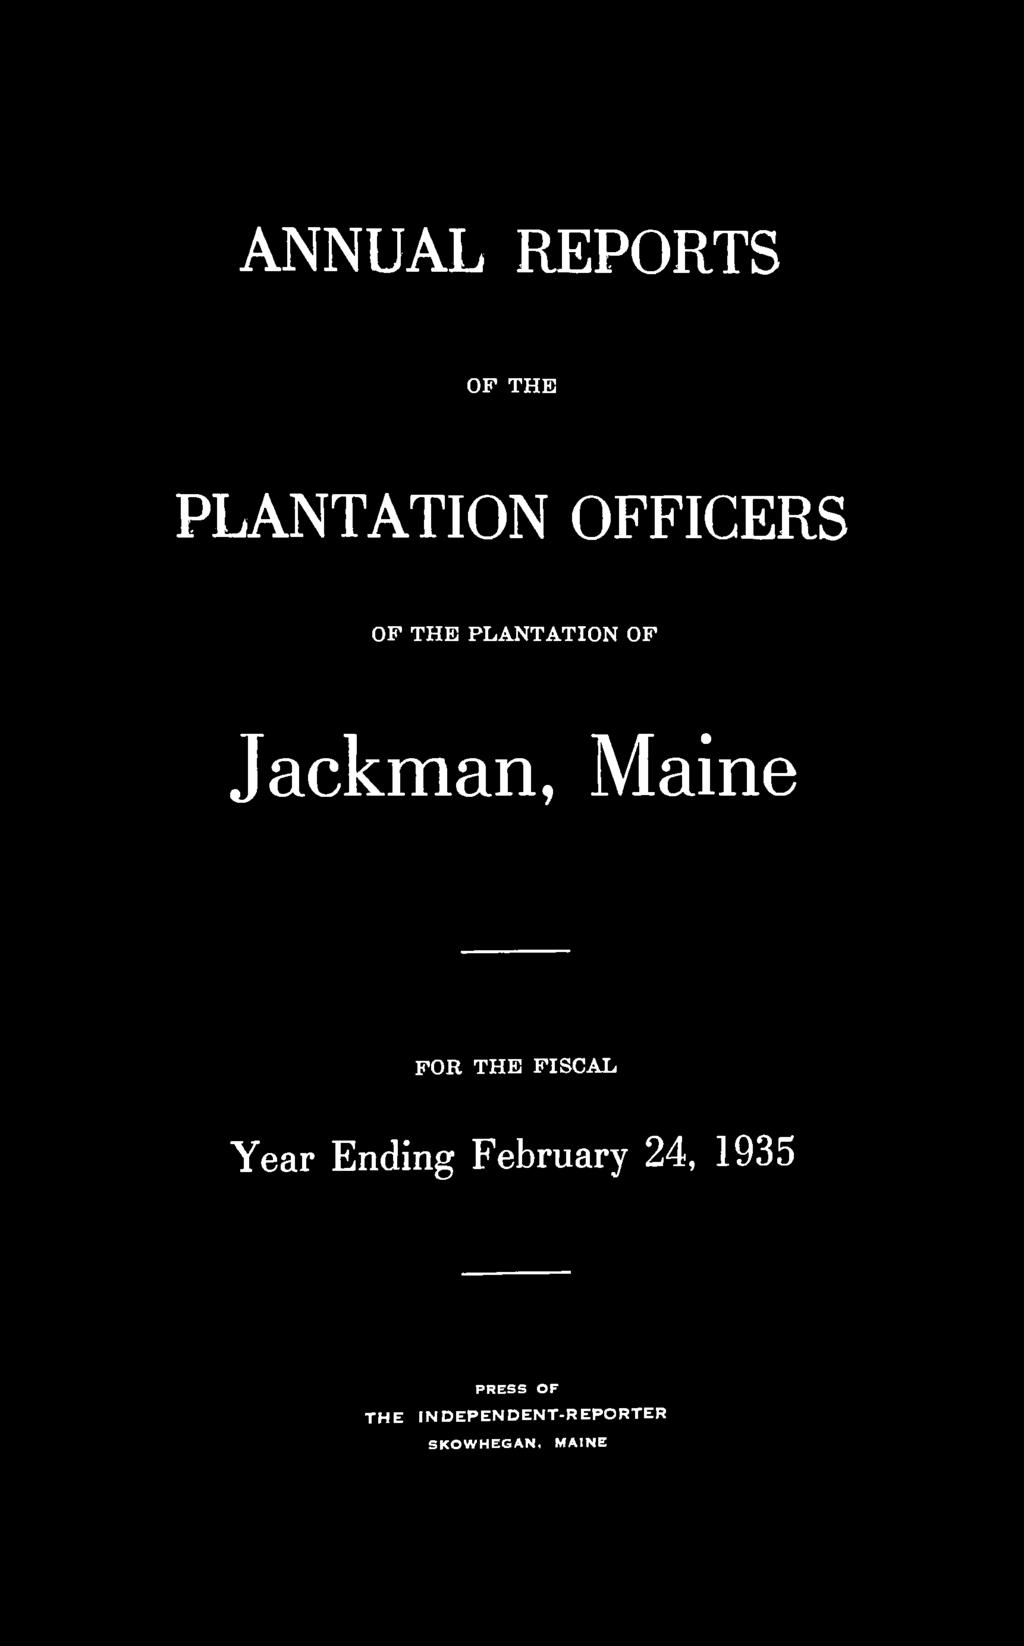 ANNUAL REPORTS OF THE PLANTATION OFFICERS OF THE PLANTATION OF Jackman, Maine FOR THE